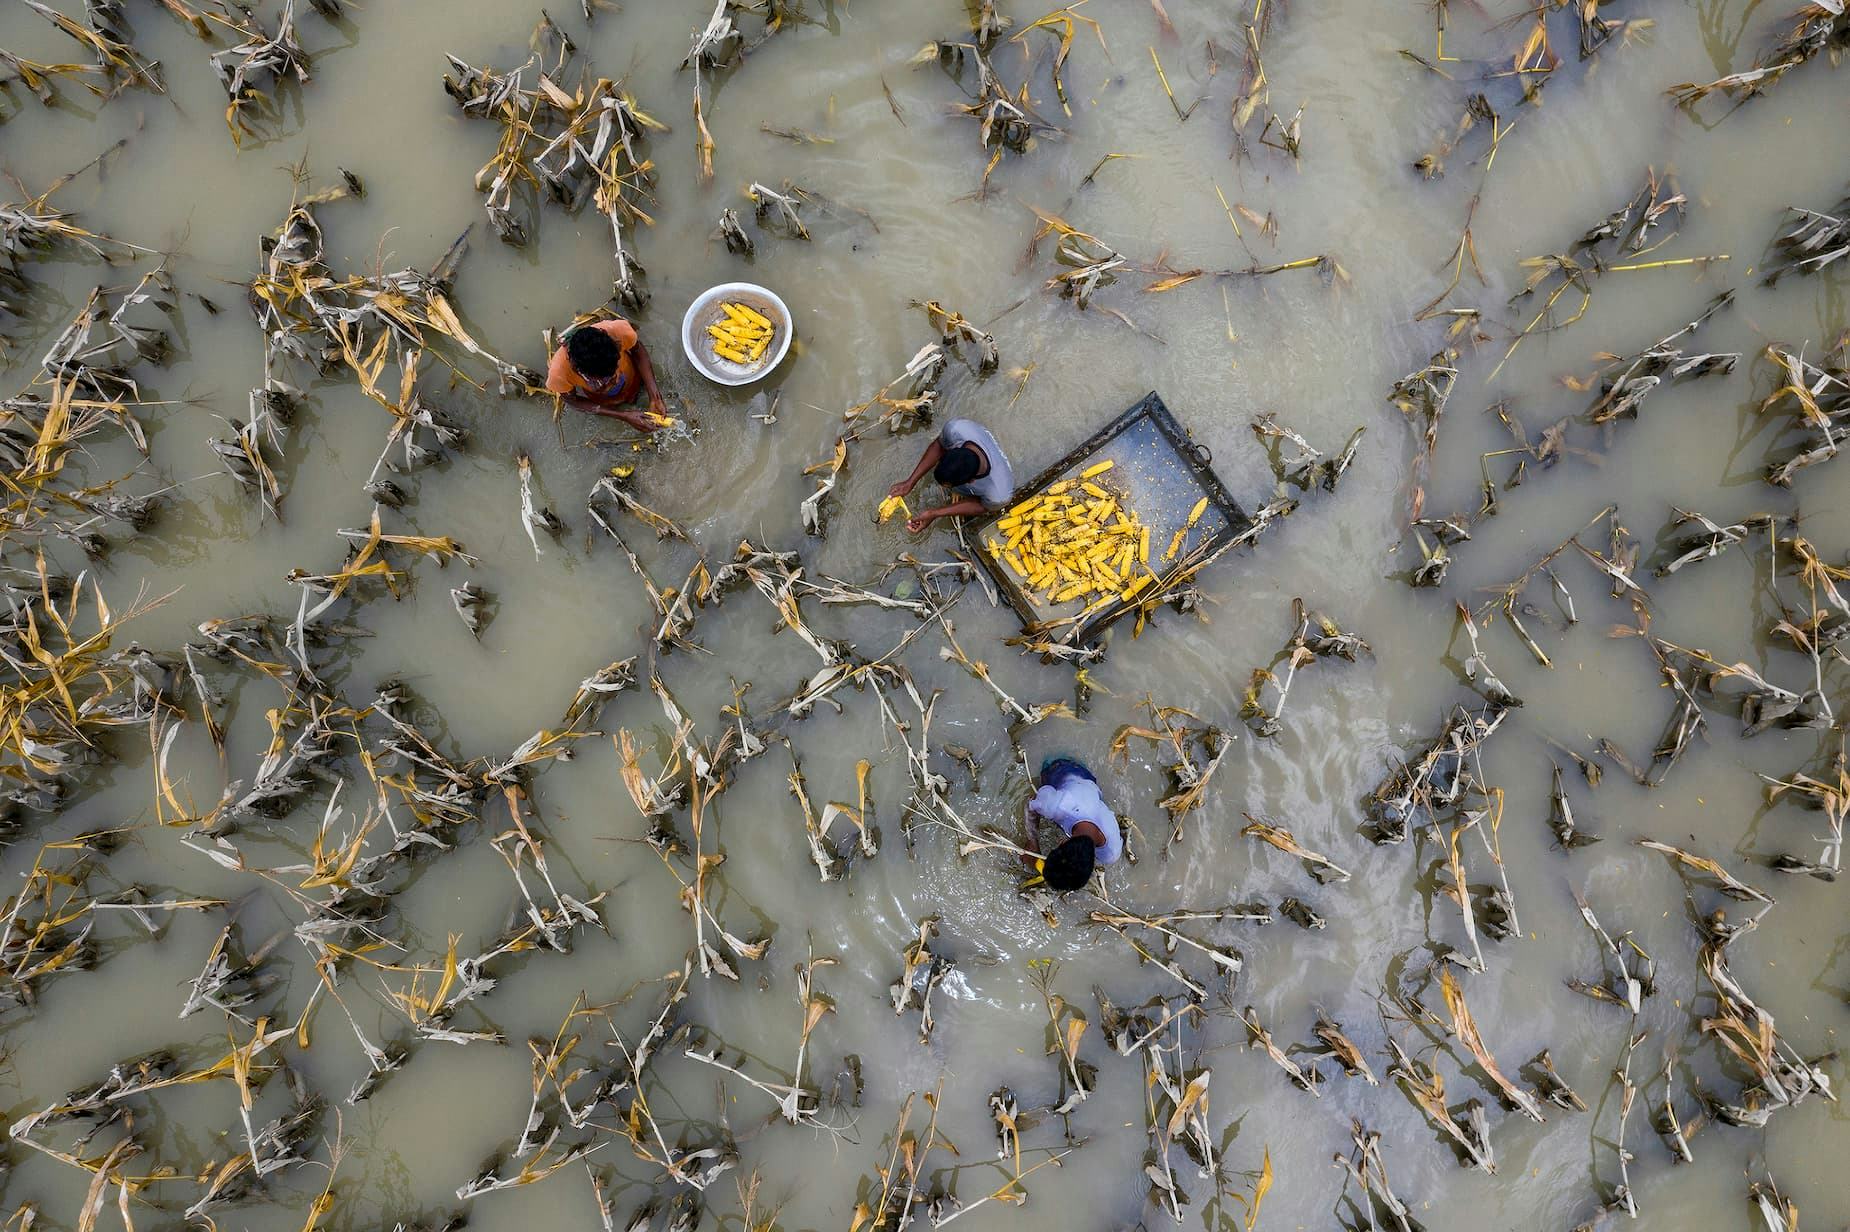 Farmers trying to salvage corn lost in floods, Bangladesh